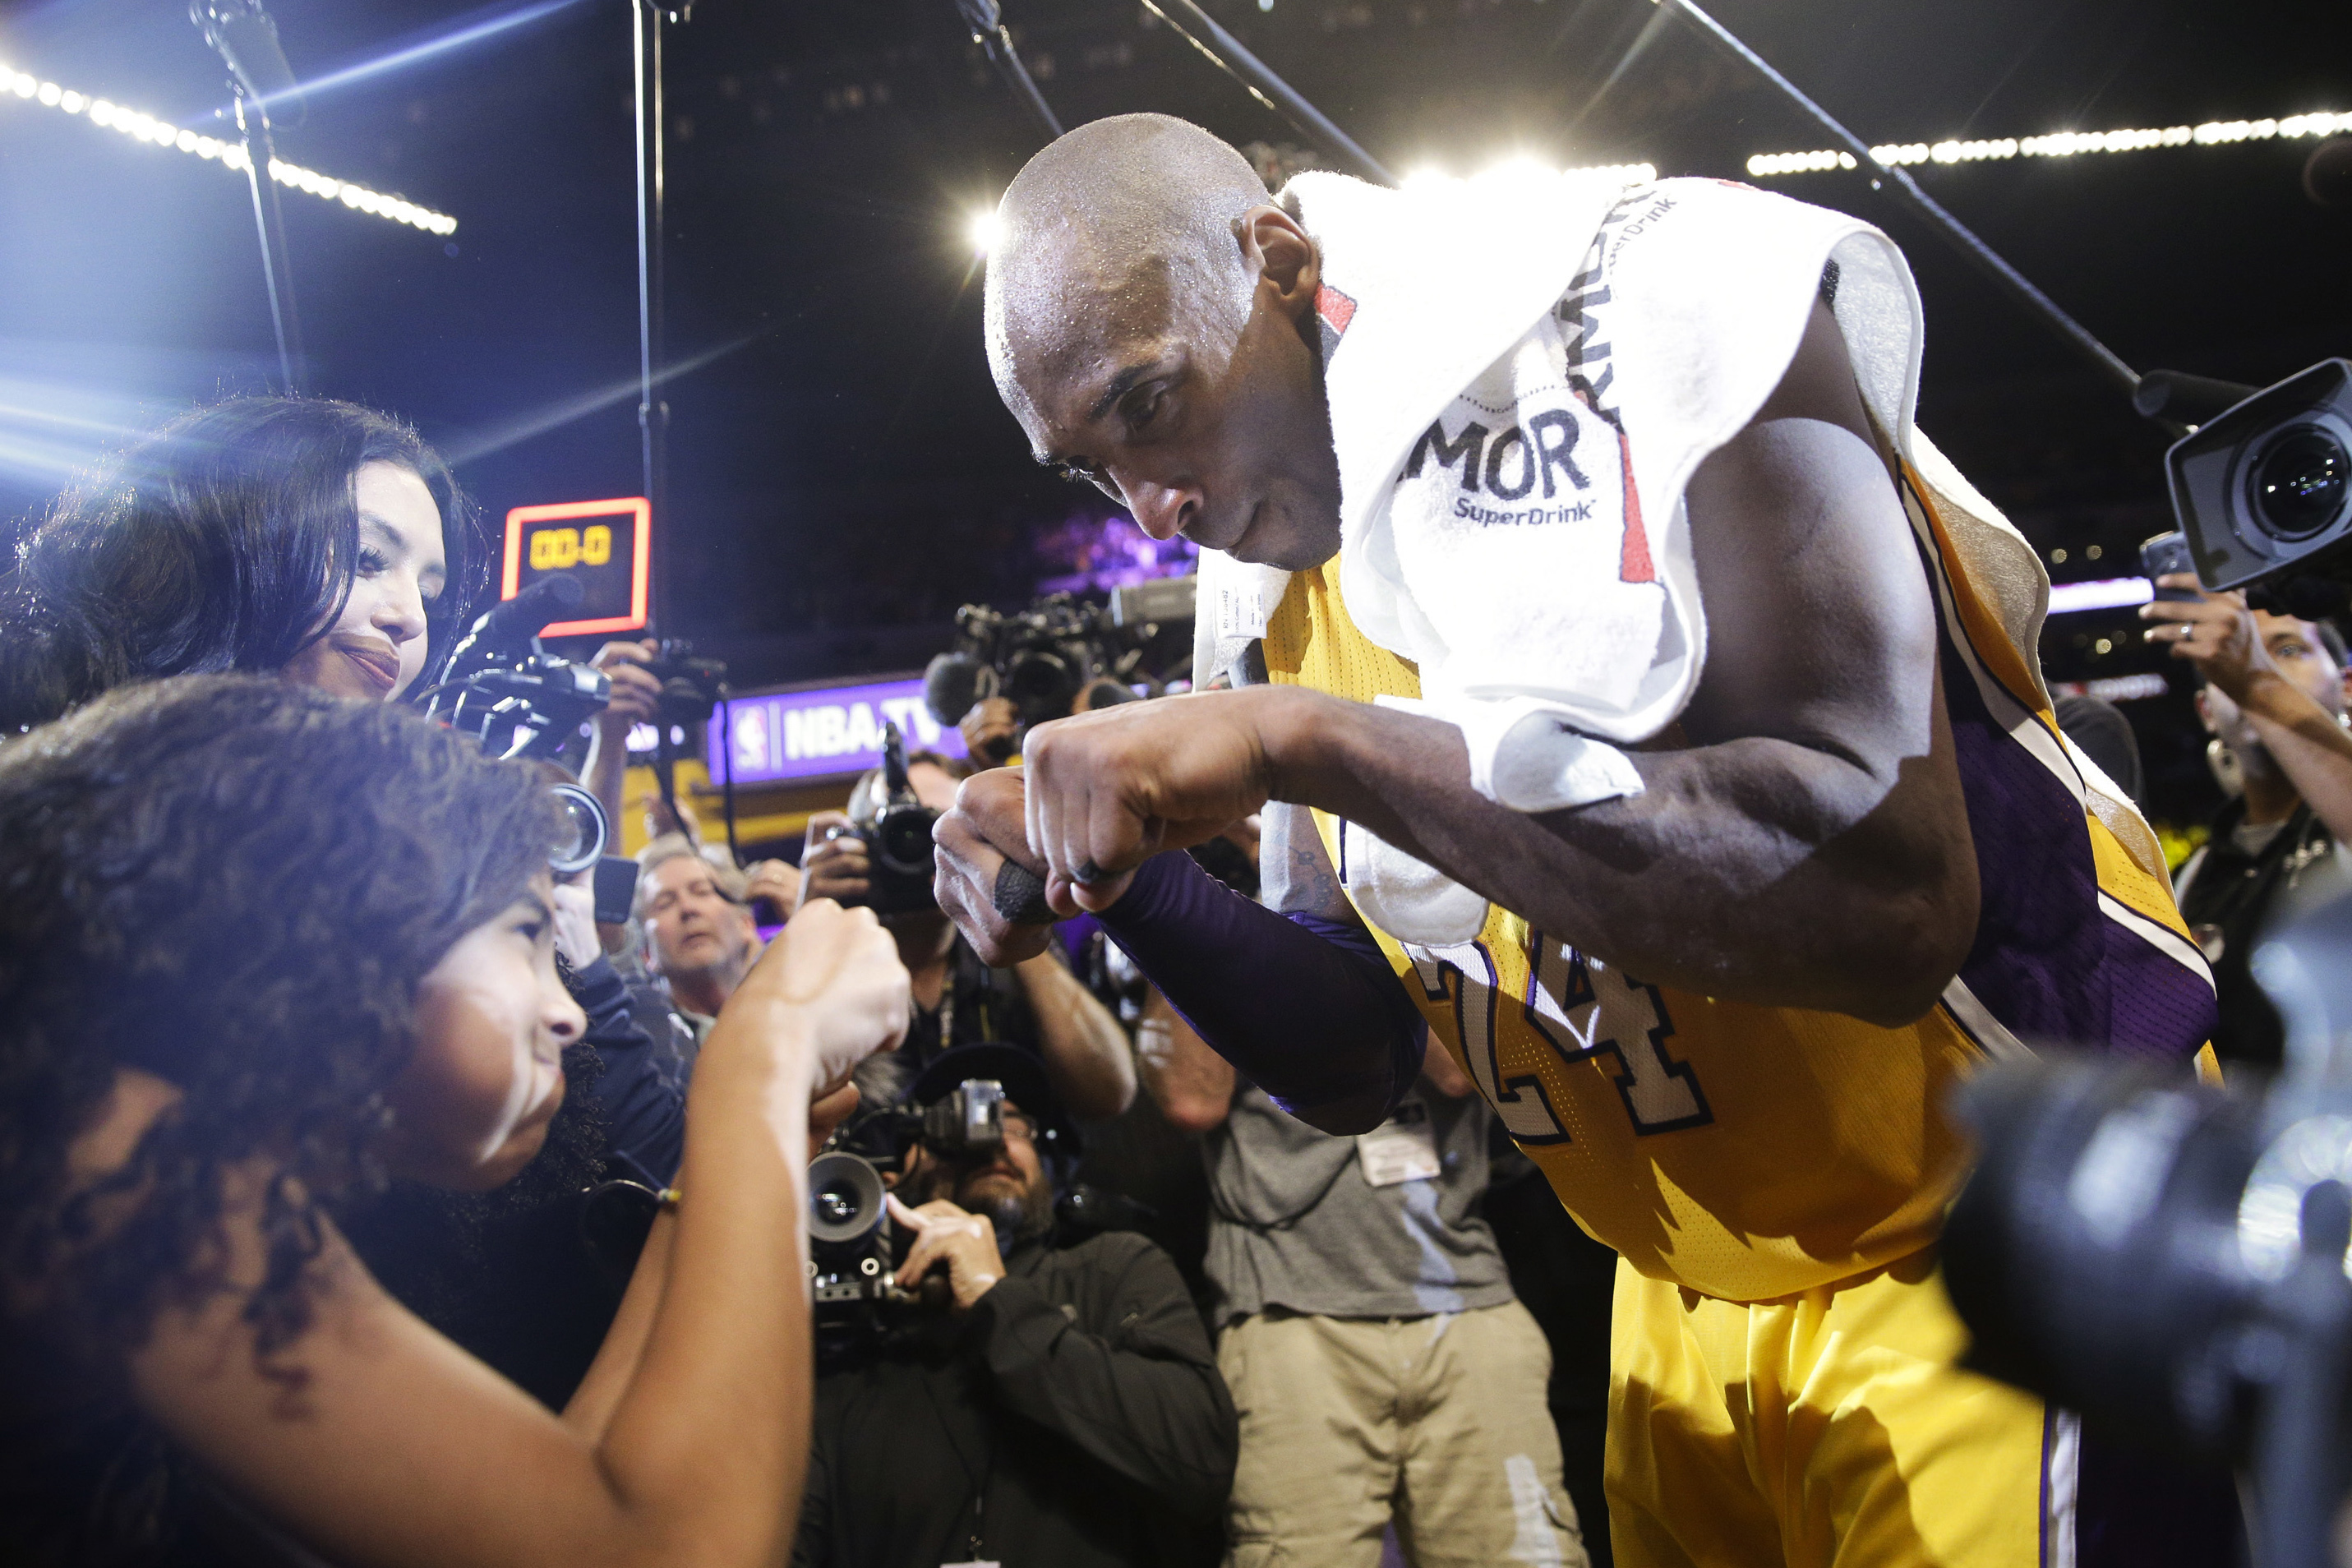 Los Angeles Lakers' Kobe Bryant fist-bumps his daughter Gianna after the last NBA basketball game of his career, in 2016.